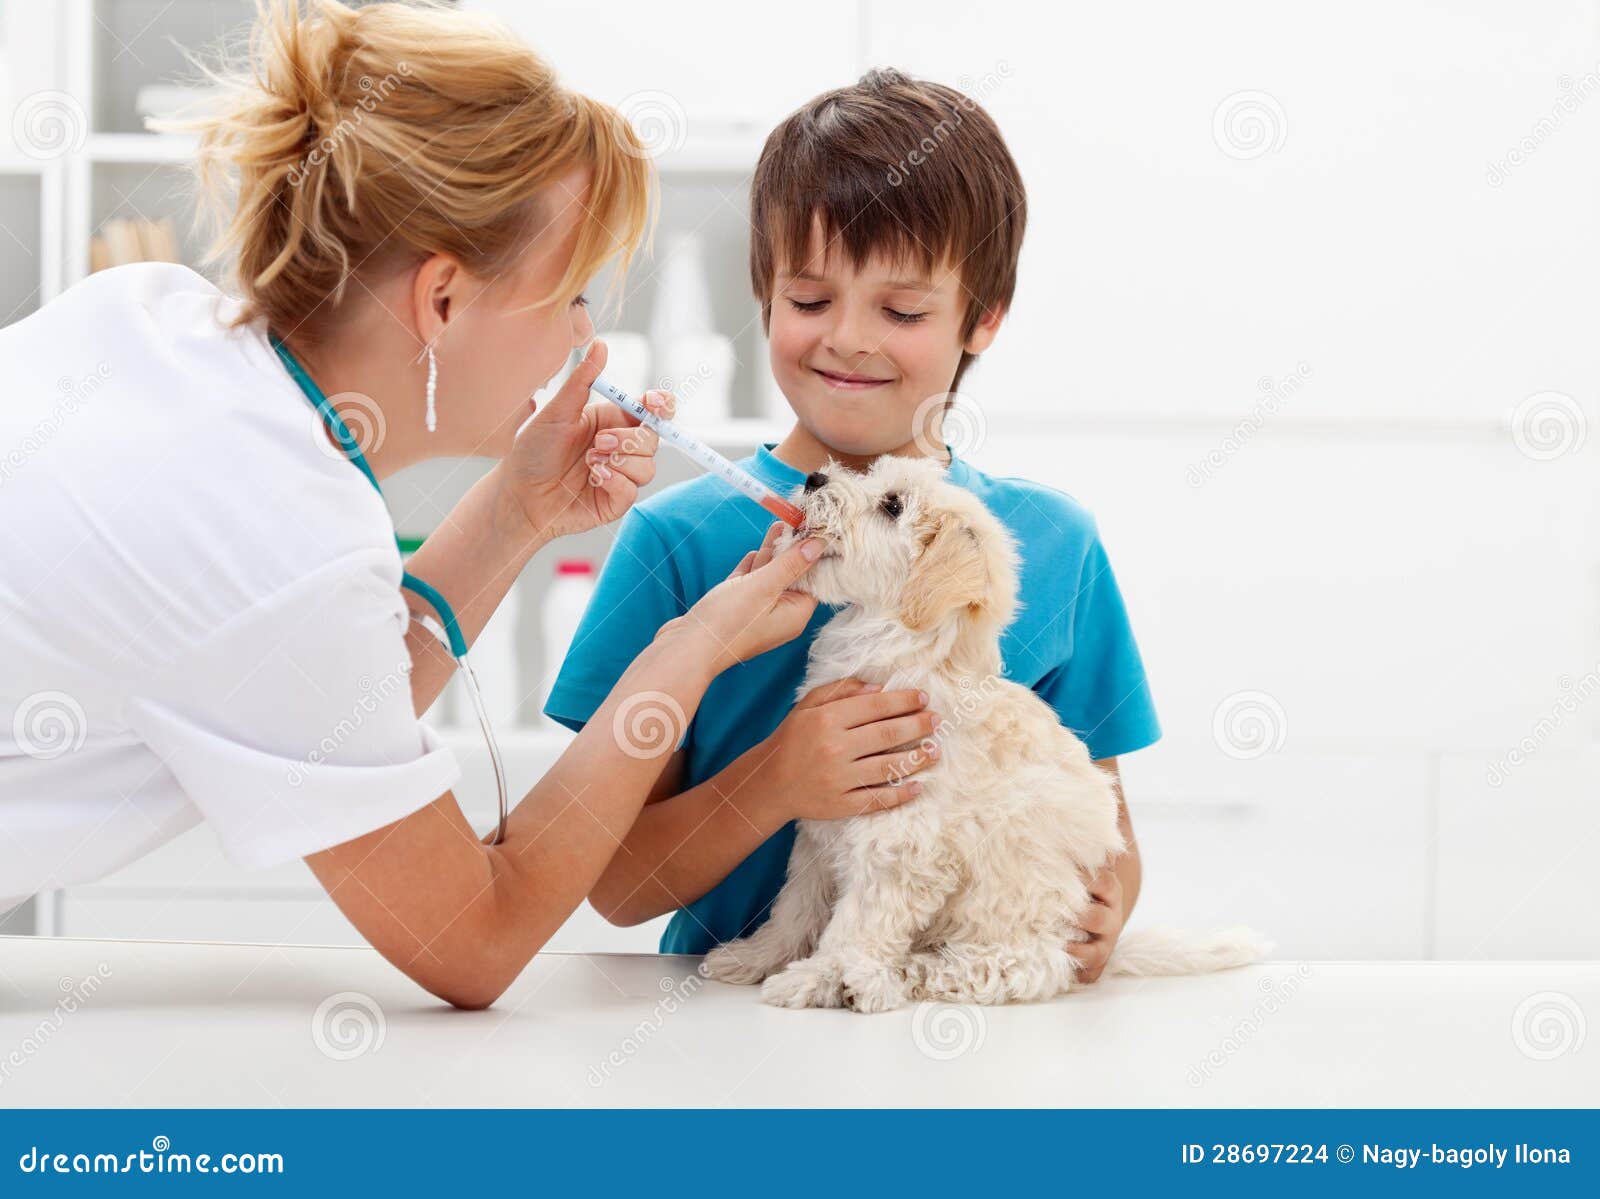 boy at the veterinary with his dog